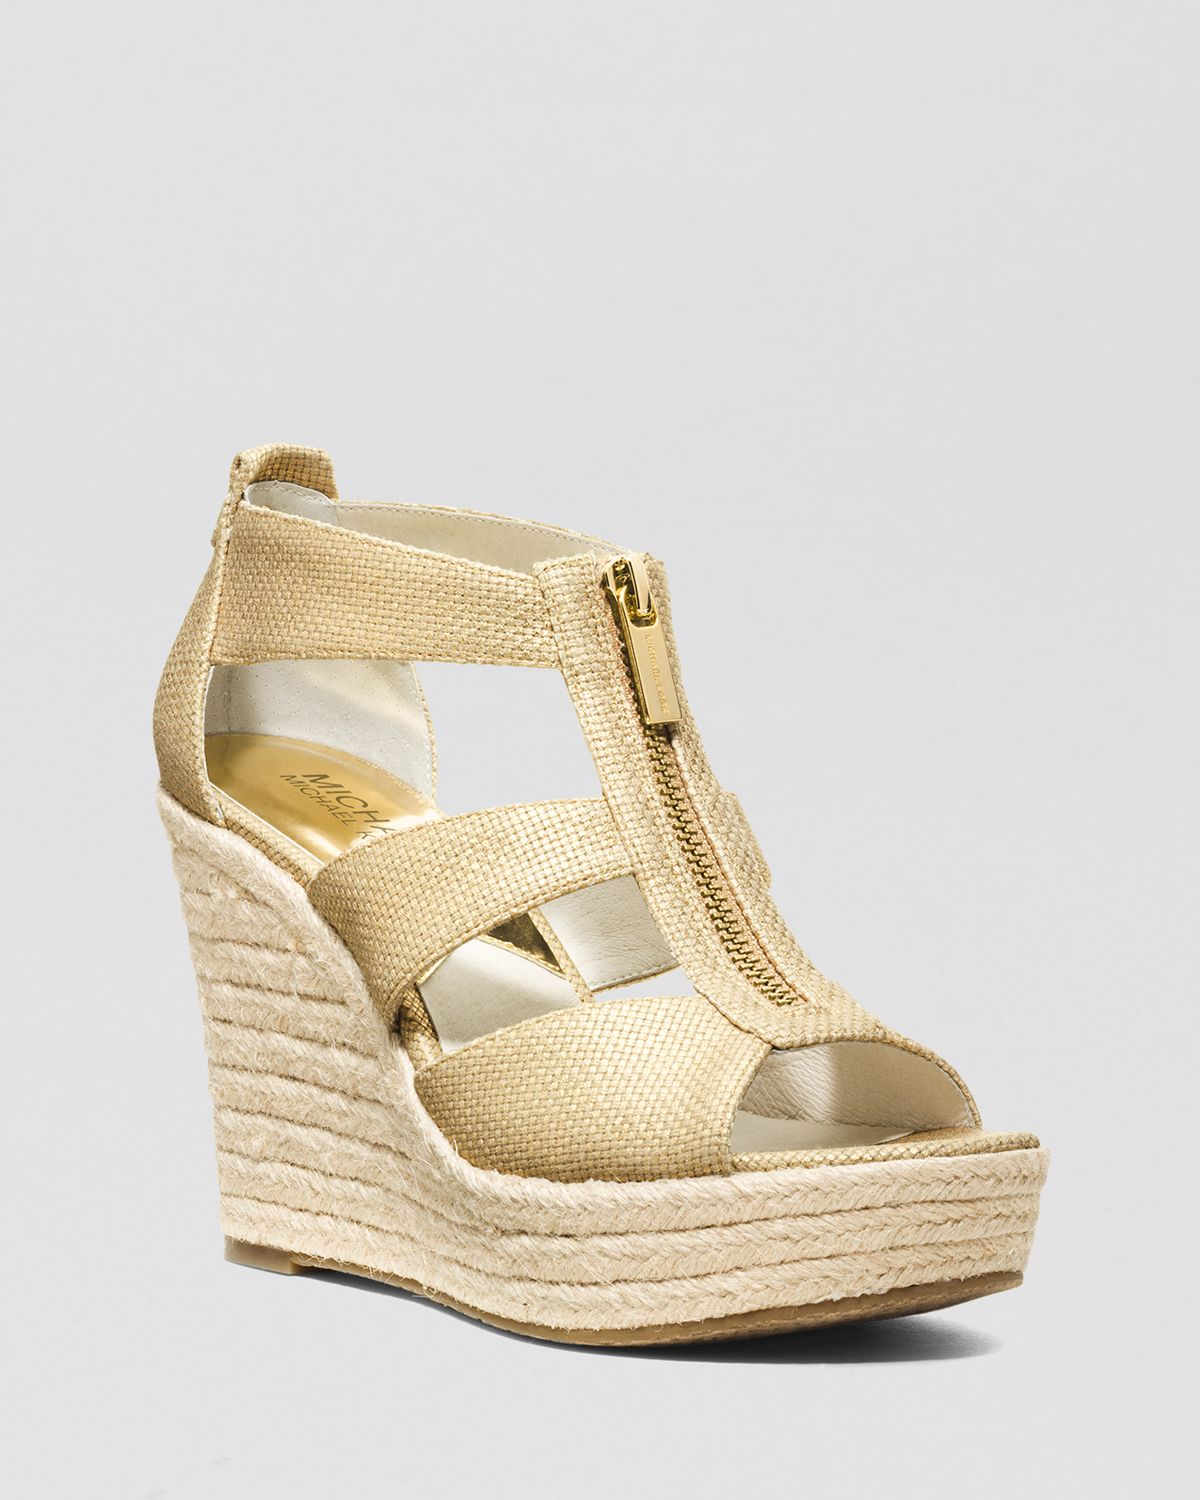 Michael Kors Gold Wedge Sandals Store, 56% OFF | www.sushithaionline.com